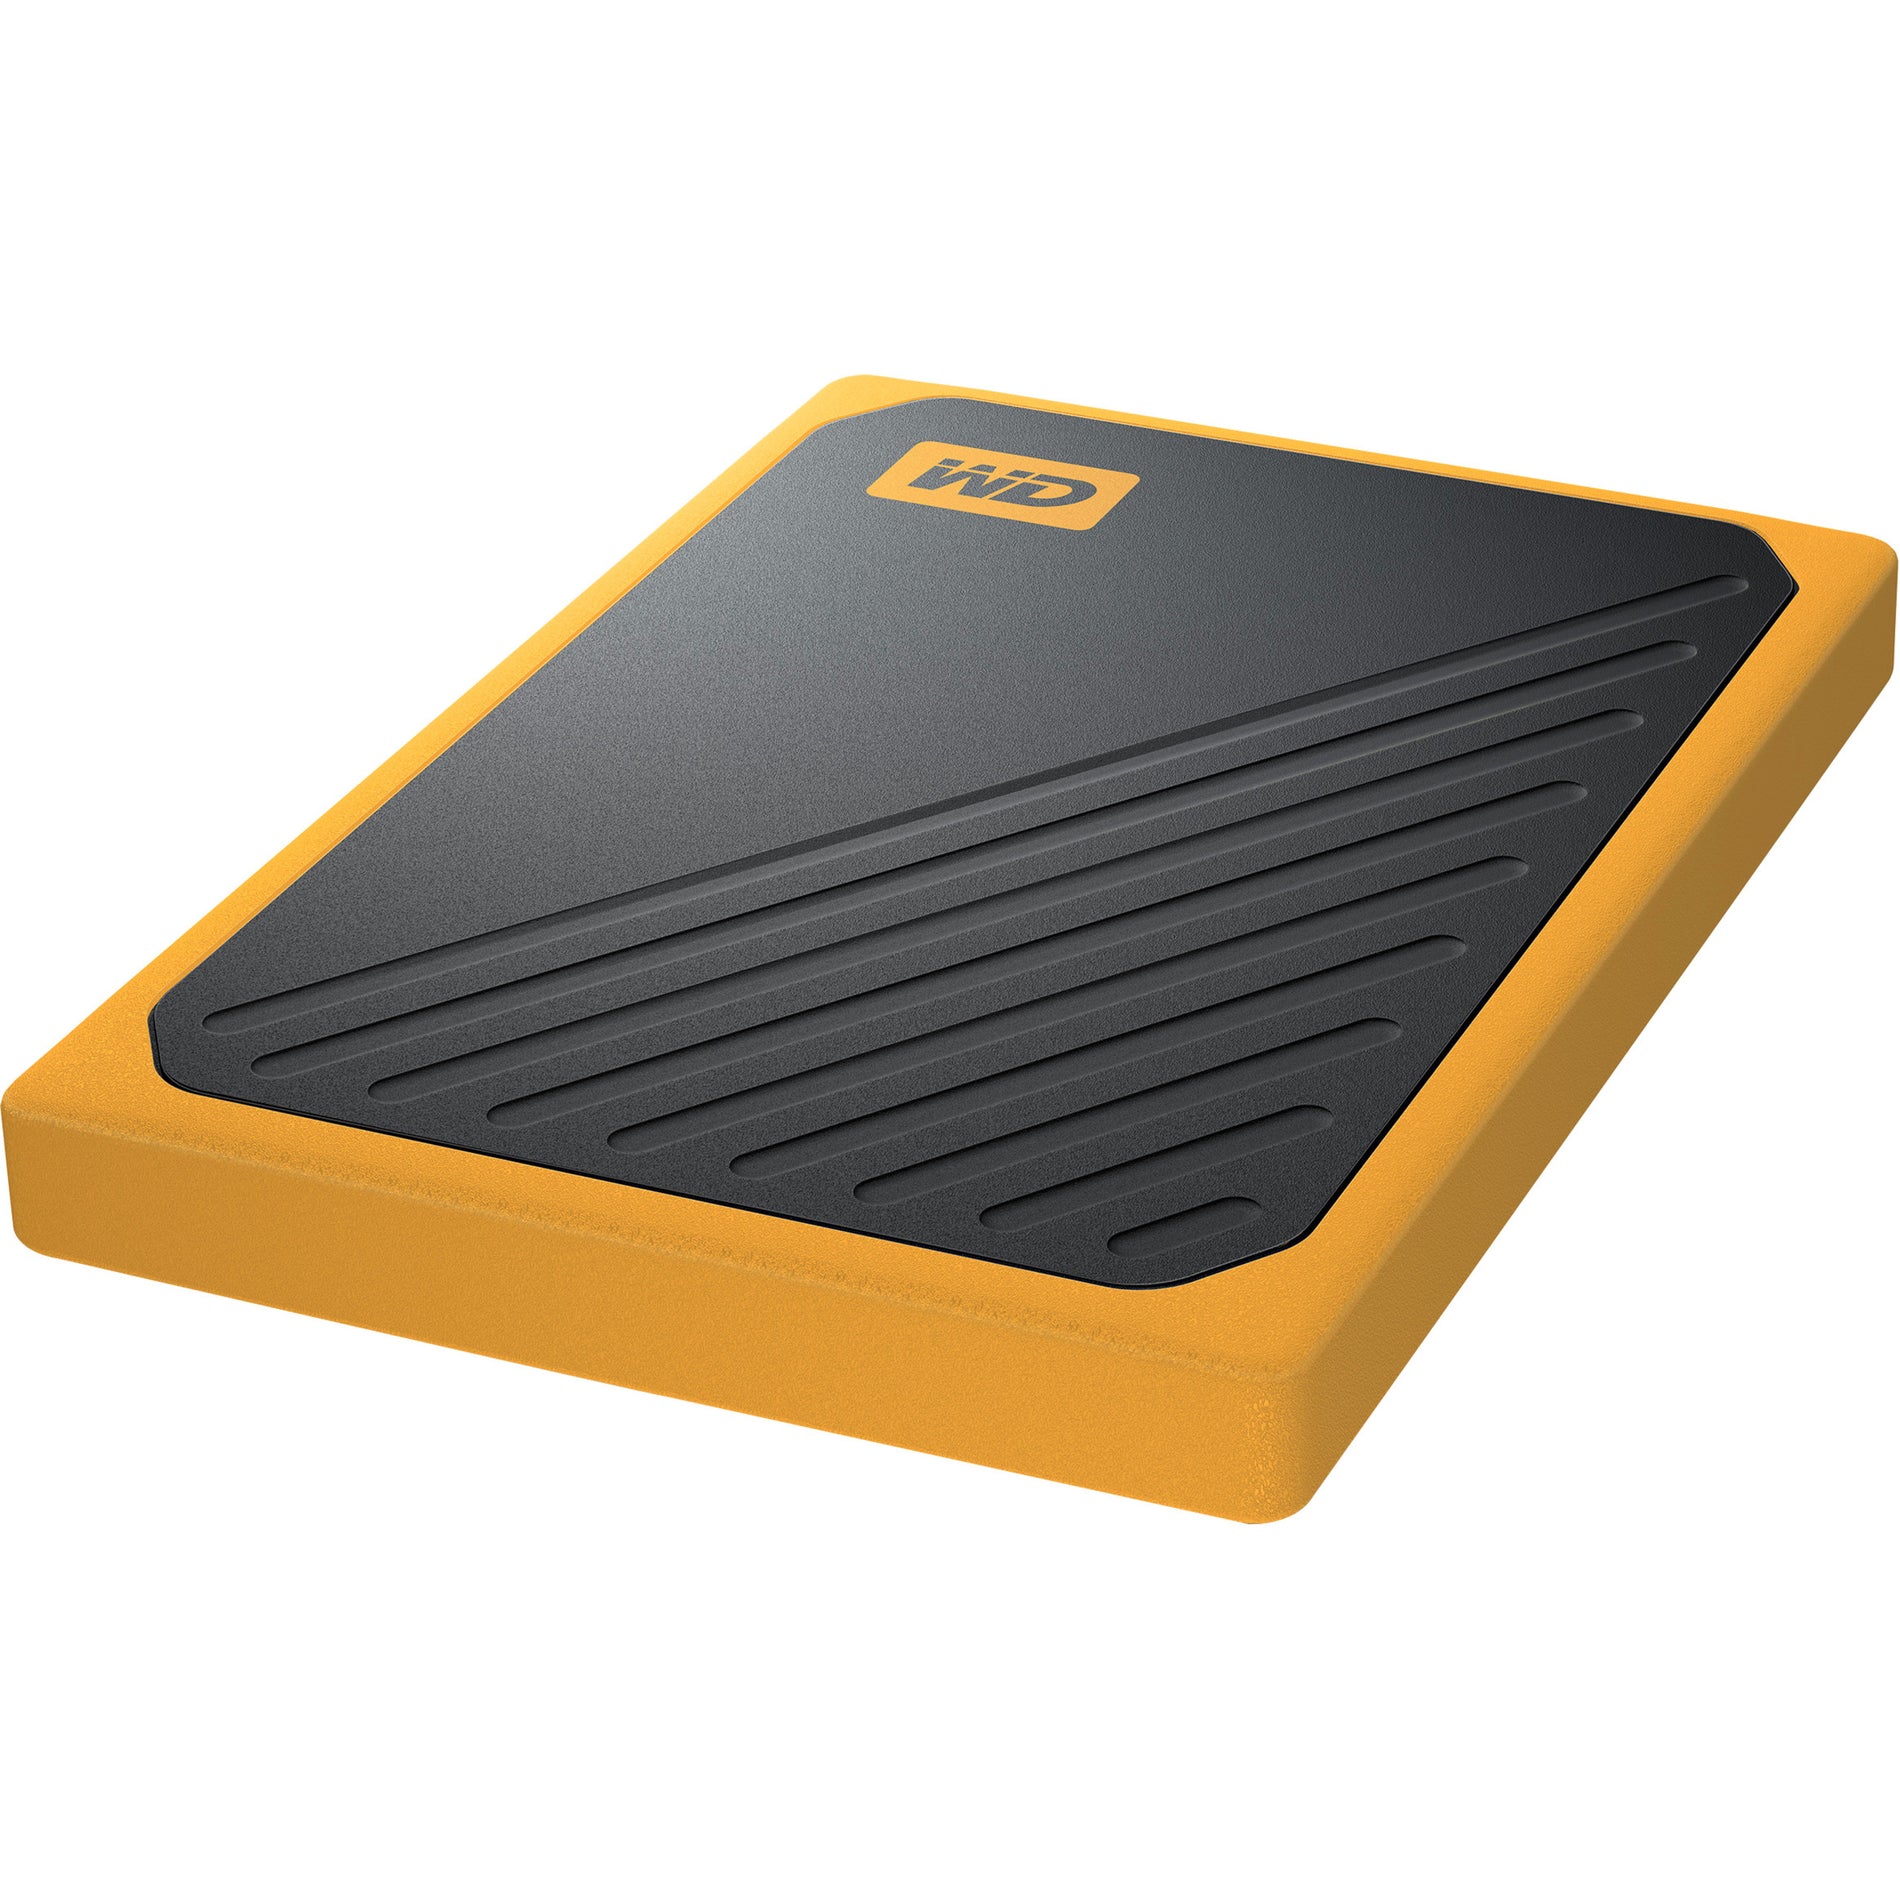 WD WDBMCG5000AYT-WESN My Passport Go Portable SSD with Built-in USB Cable, 500 GB - Black, Amber